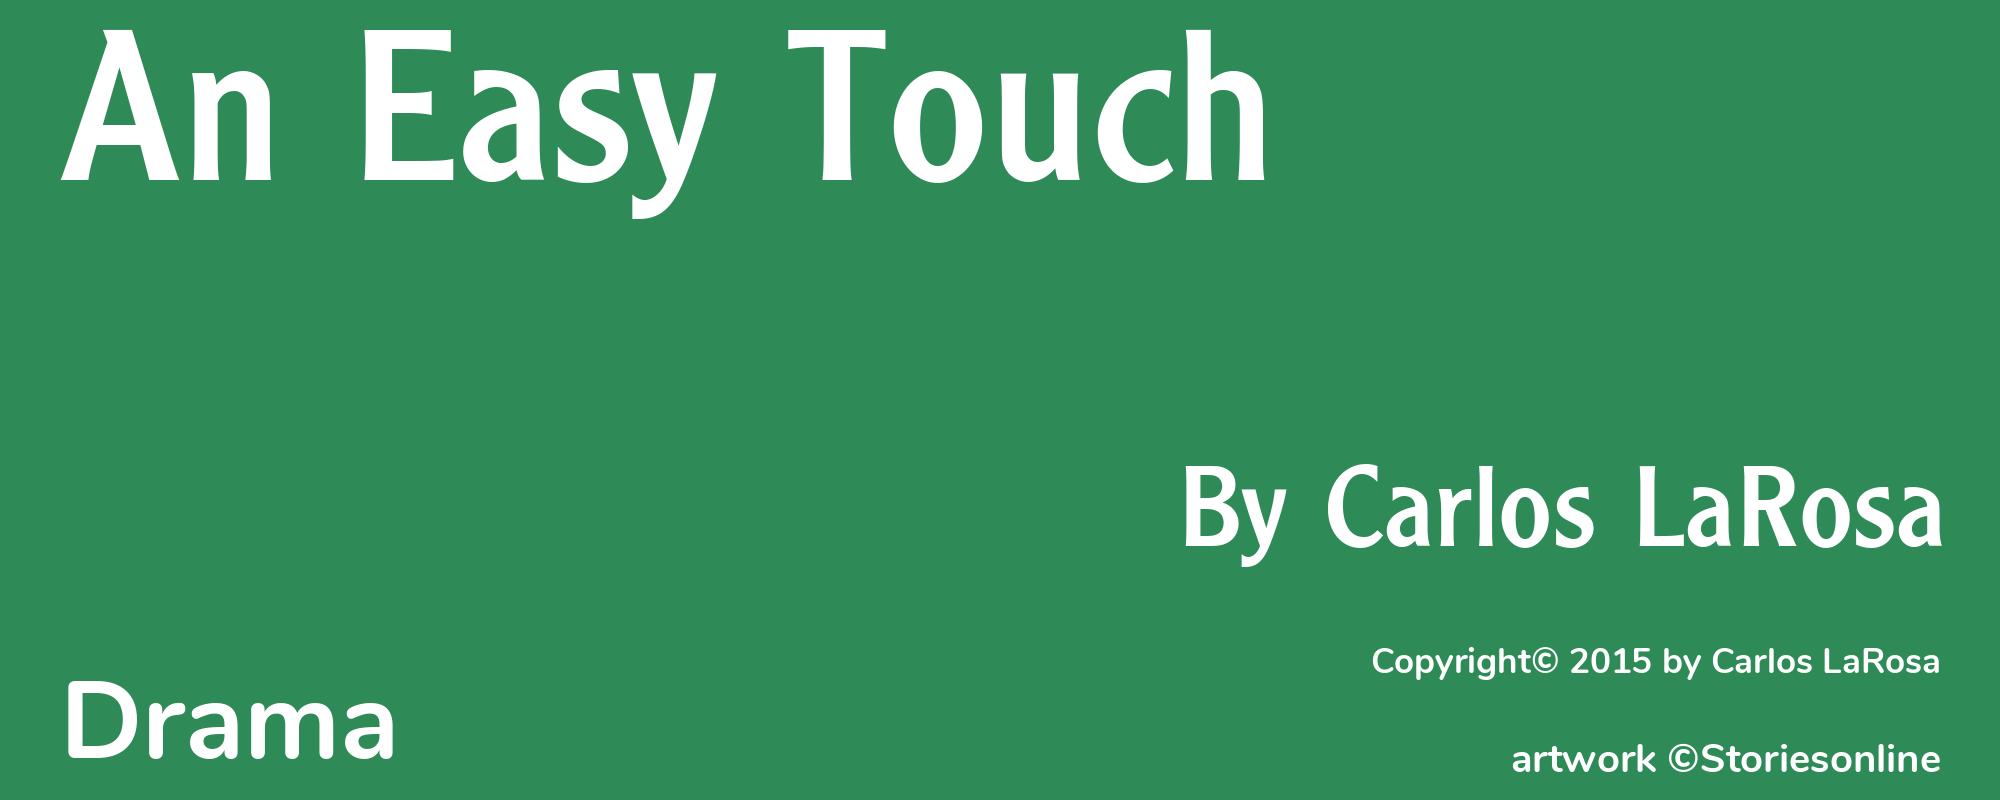 An Easy Touch - Cover